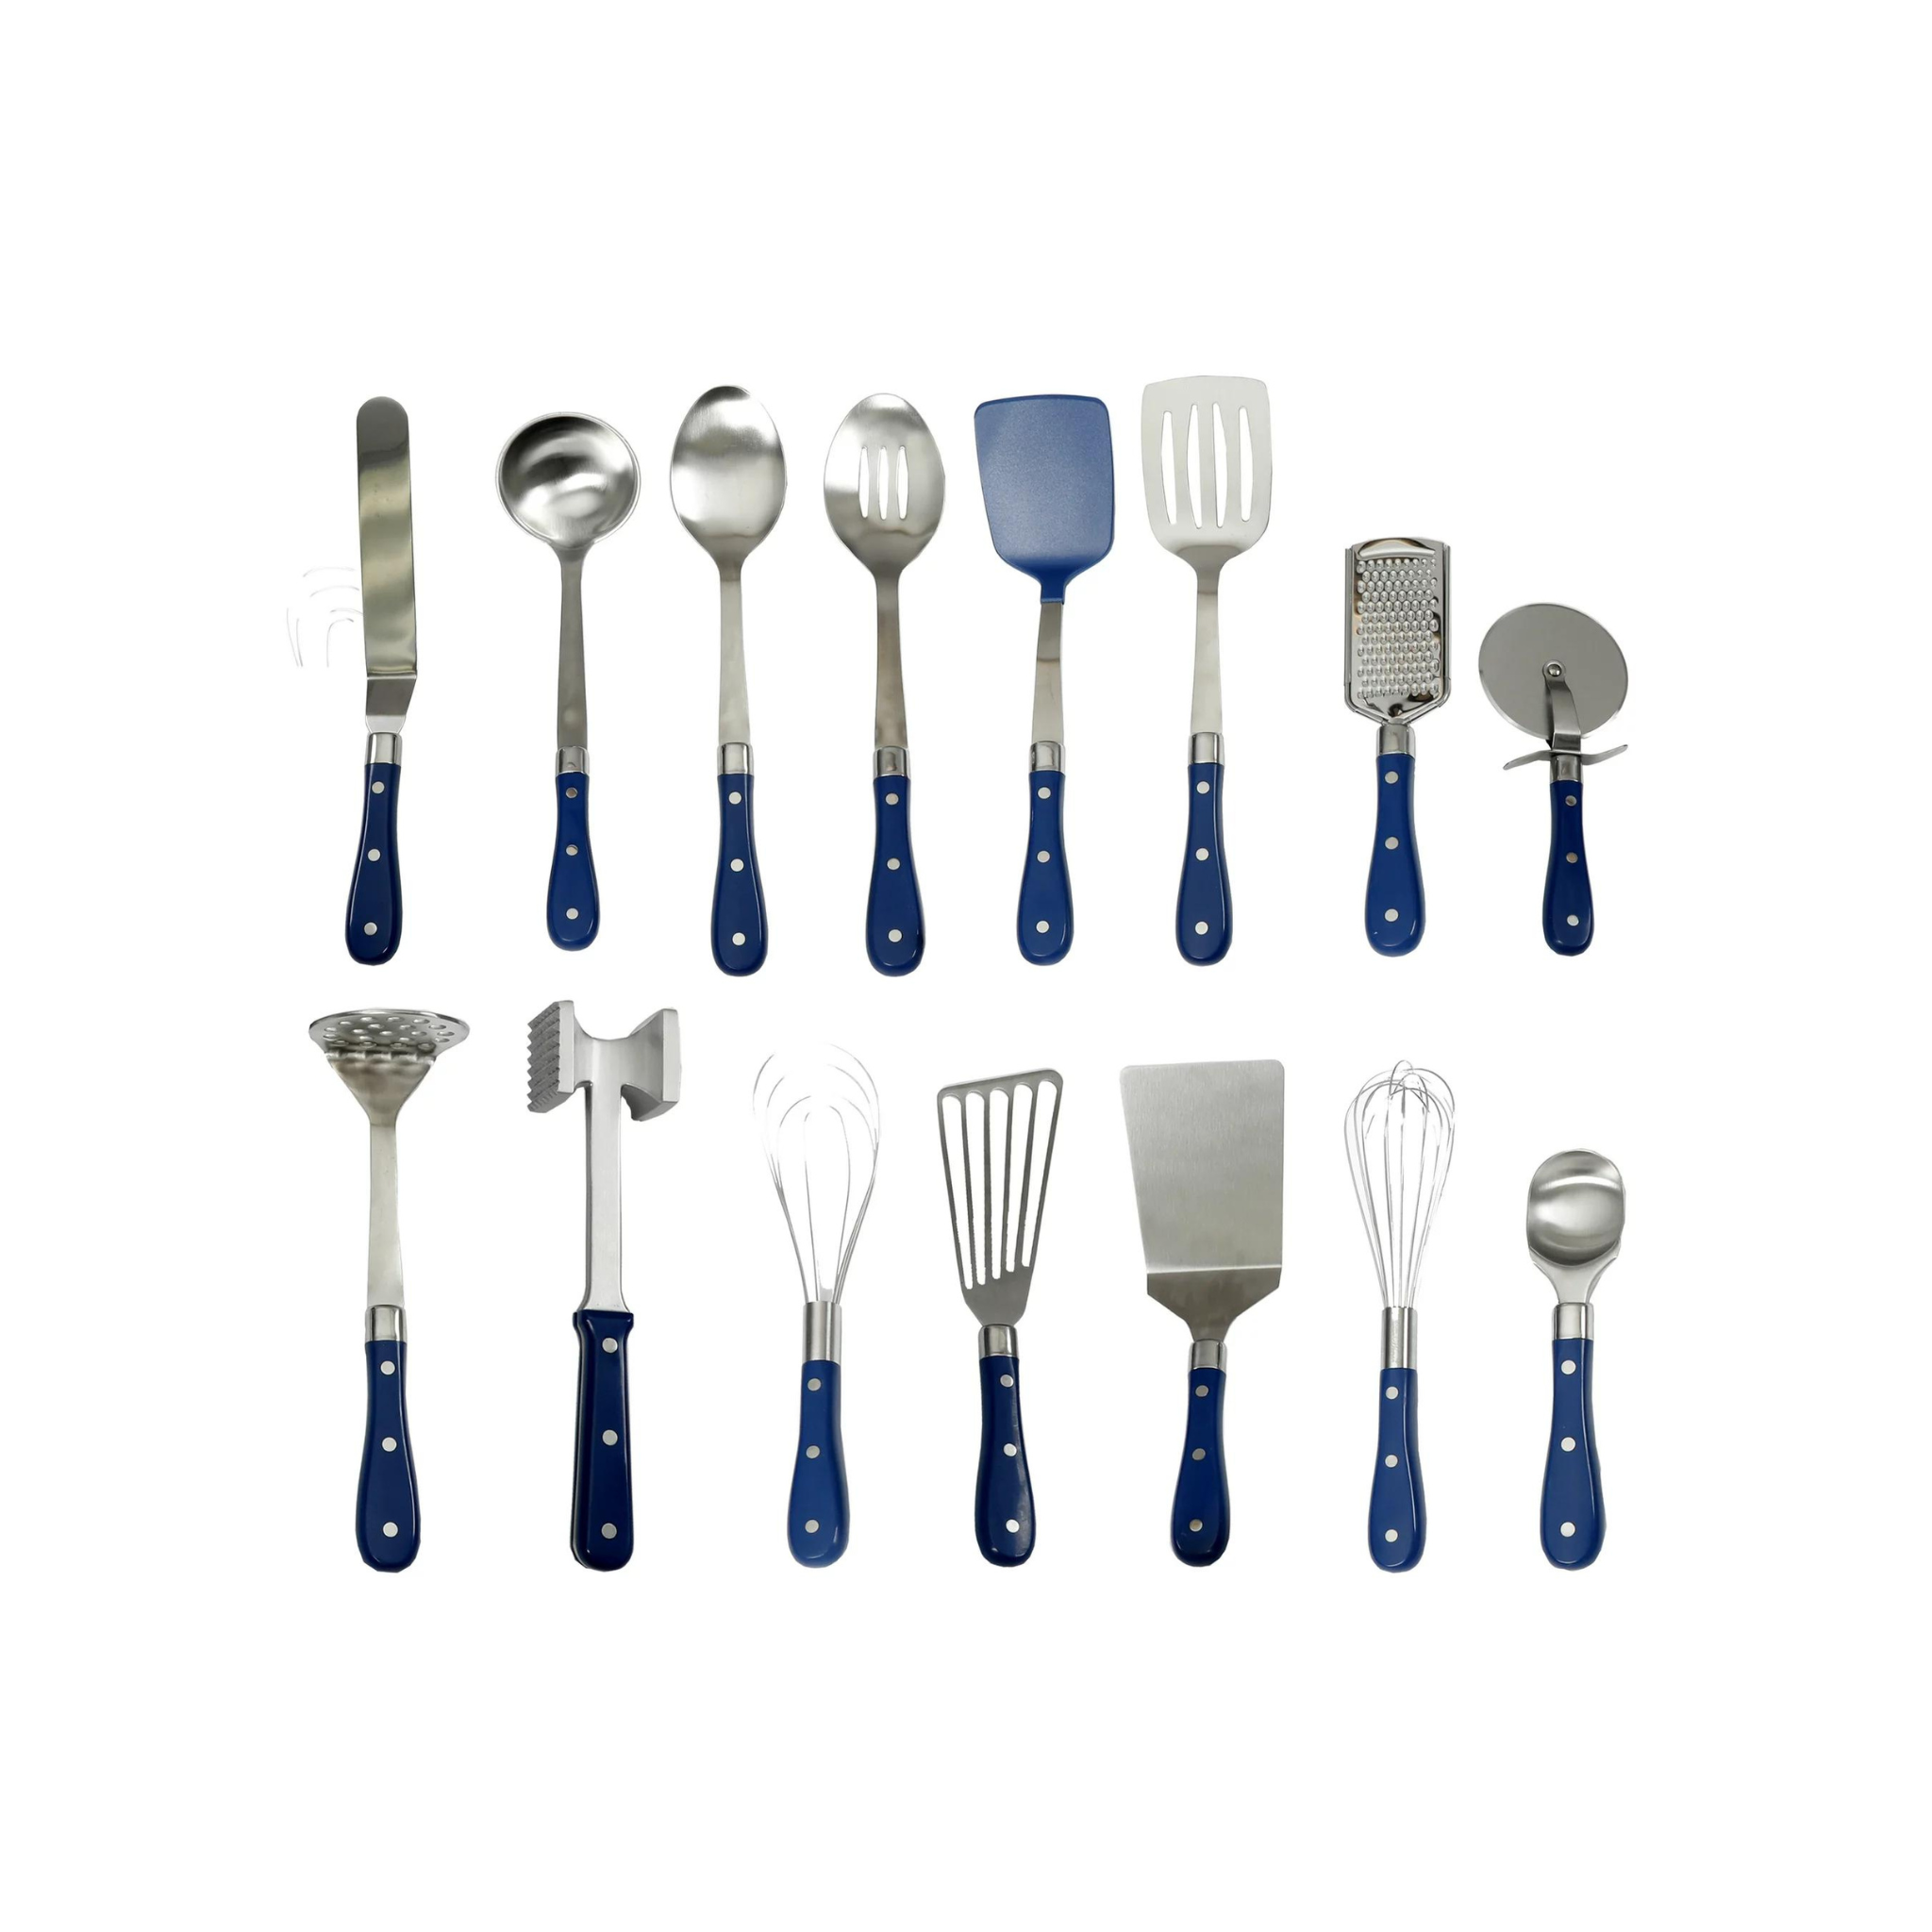 15-Pc The Pioneer Woman Frontier Collection Kitchen Tool & Gadget Set (Cobalt Blue)